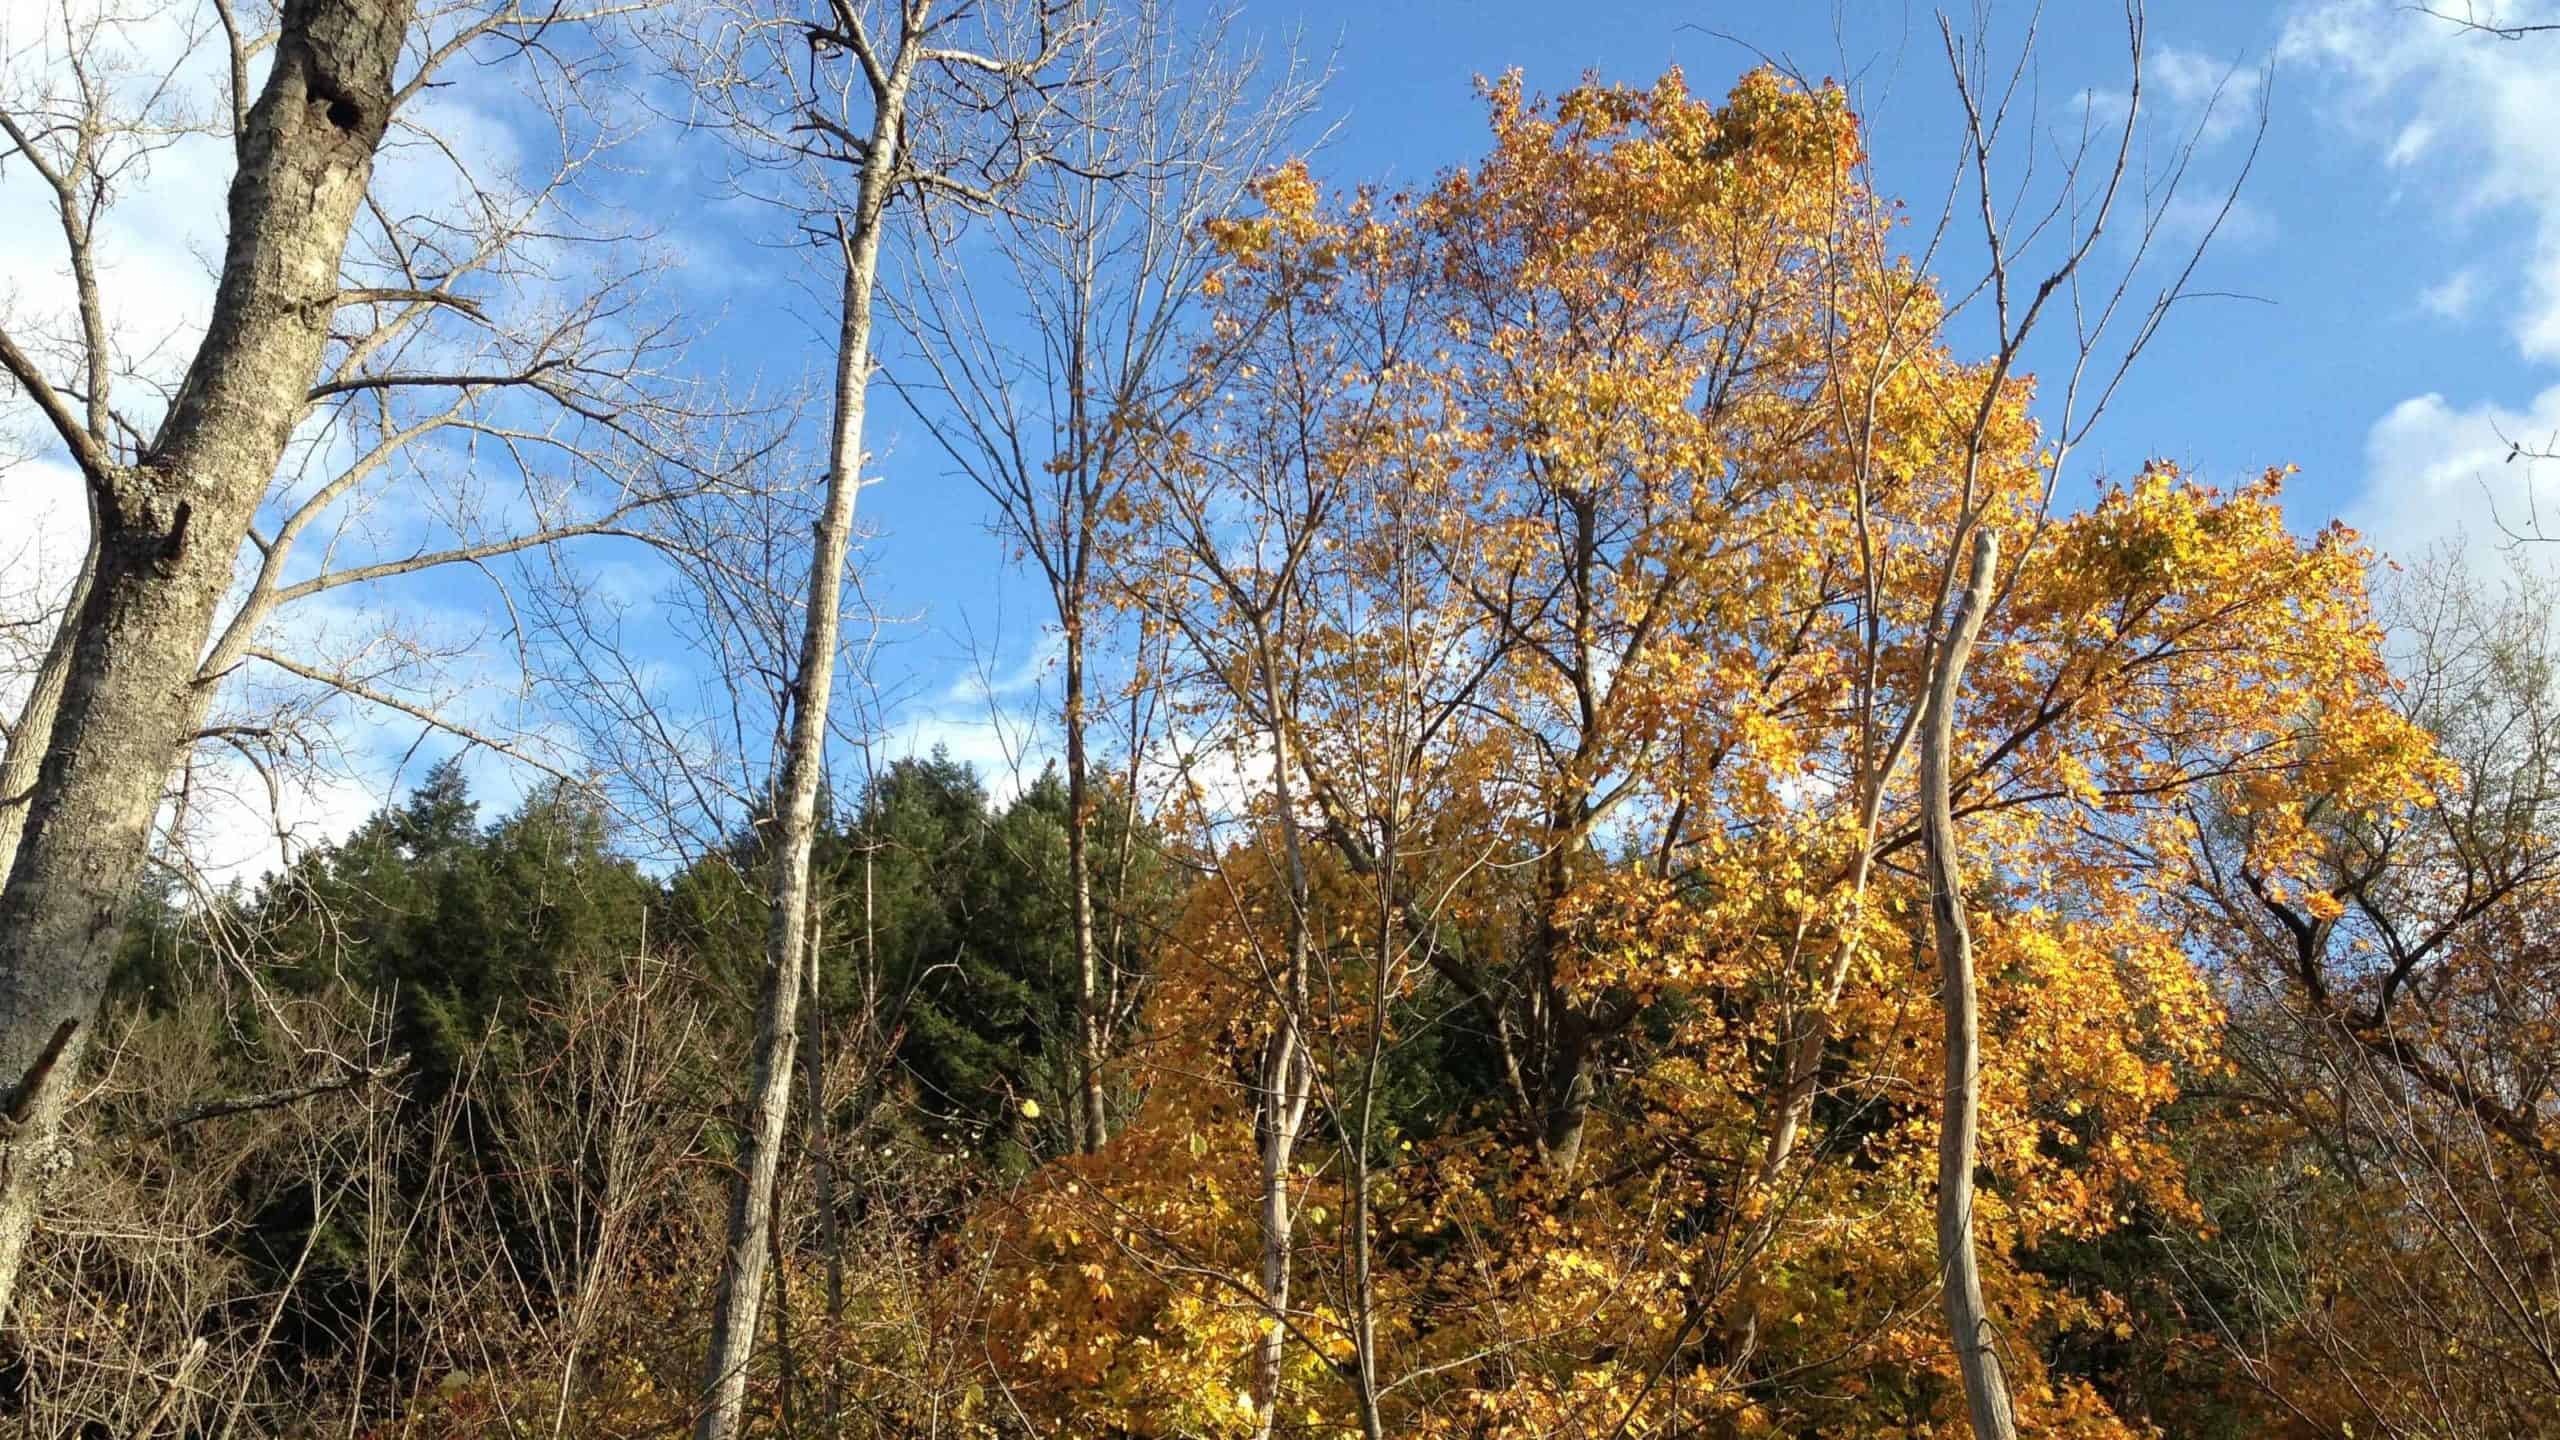 Maples turn golden in early November along the Old Mill Trail in Hinsdale.